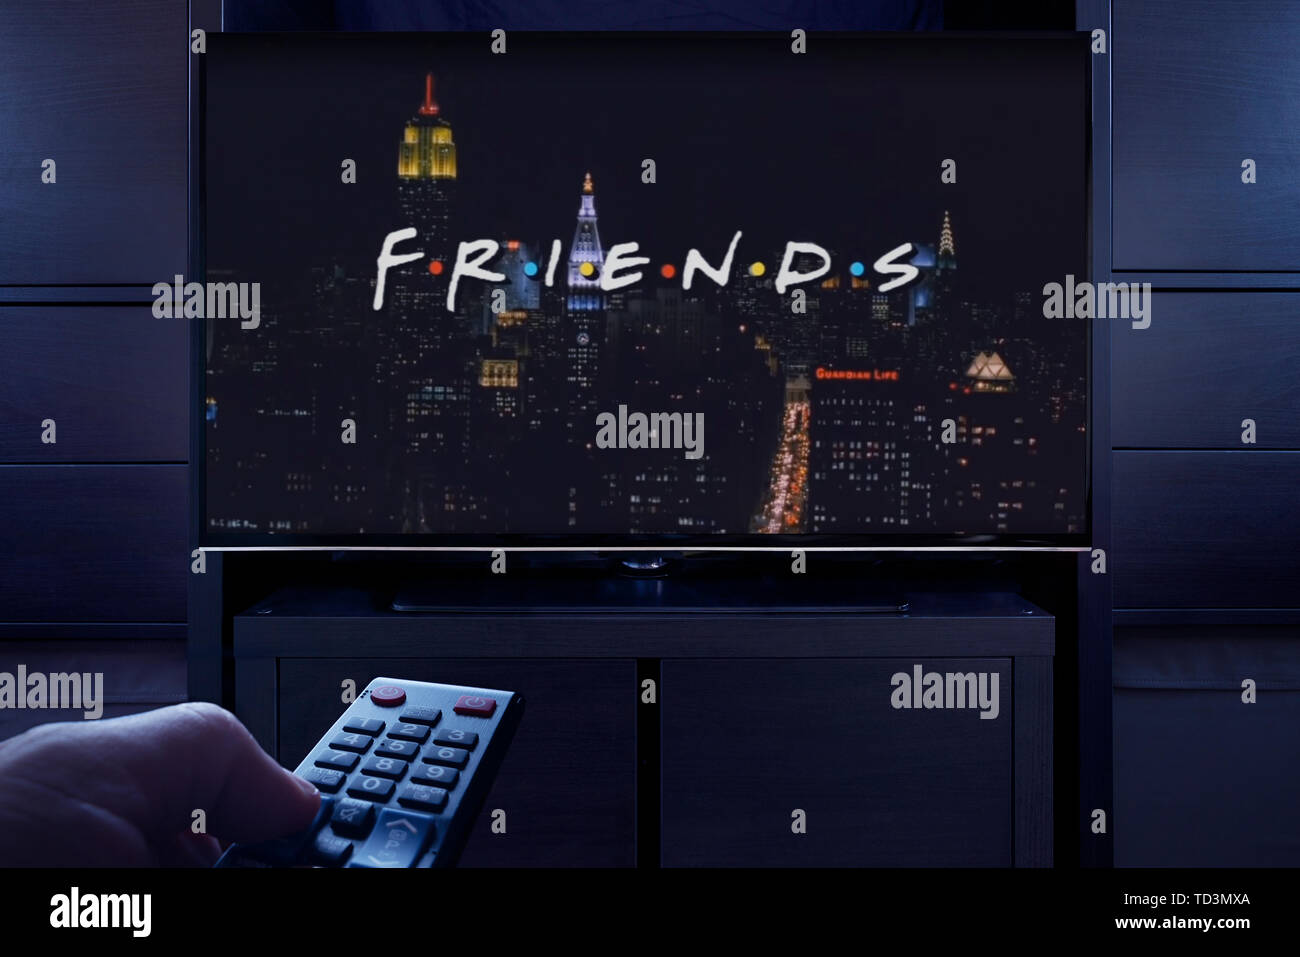 A man points a TV remote at the television which displays the Friends main title screen (Editorial use only). Stock Photo